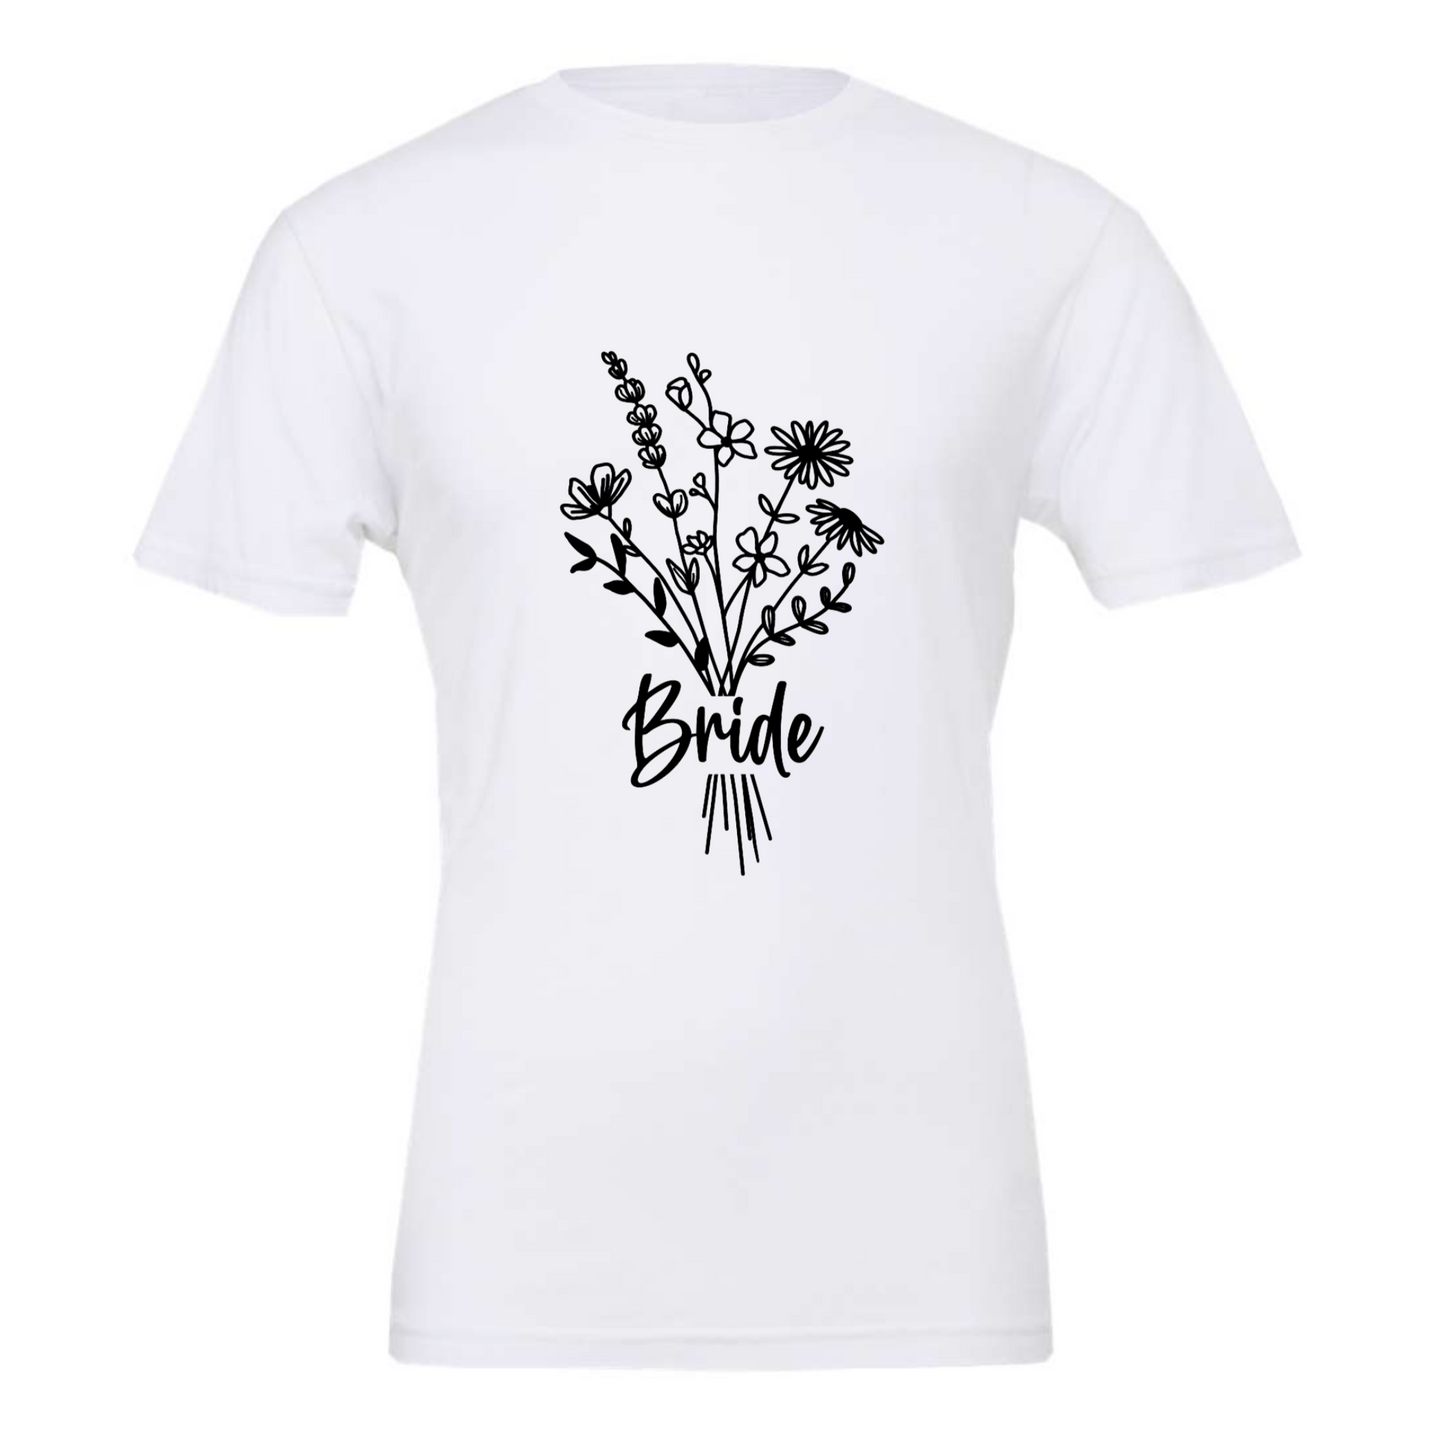 Floral Bride T-Shirt in white. The front has a bouquet of dainty flowers with the word "bride" written in the stems in a black design. This is the front view of the shirt.